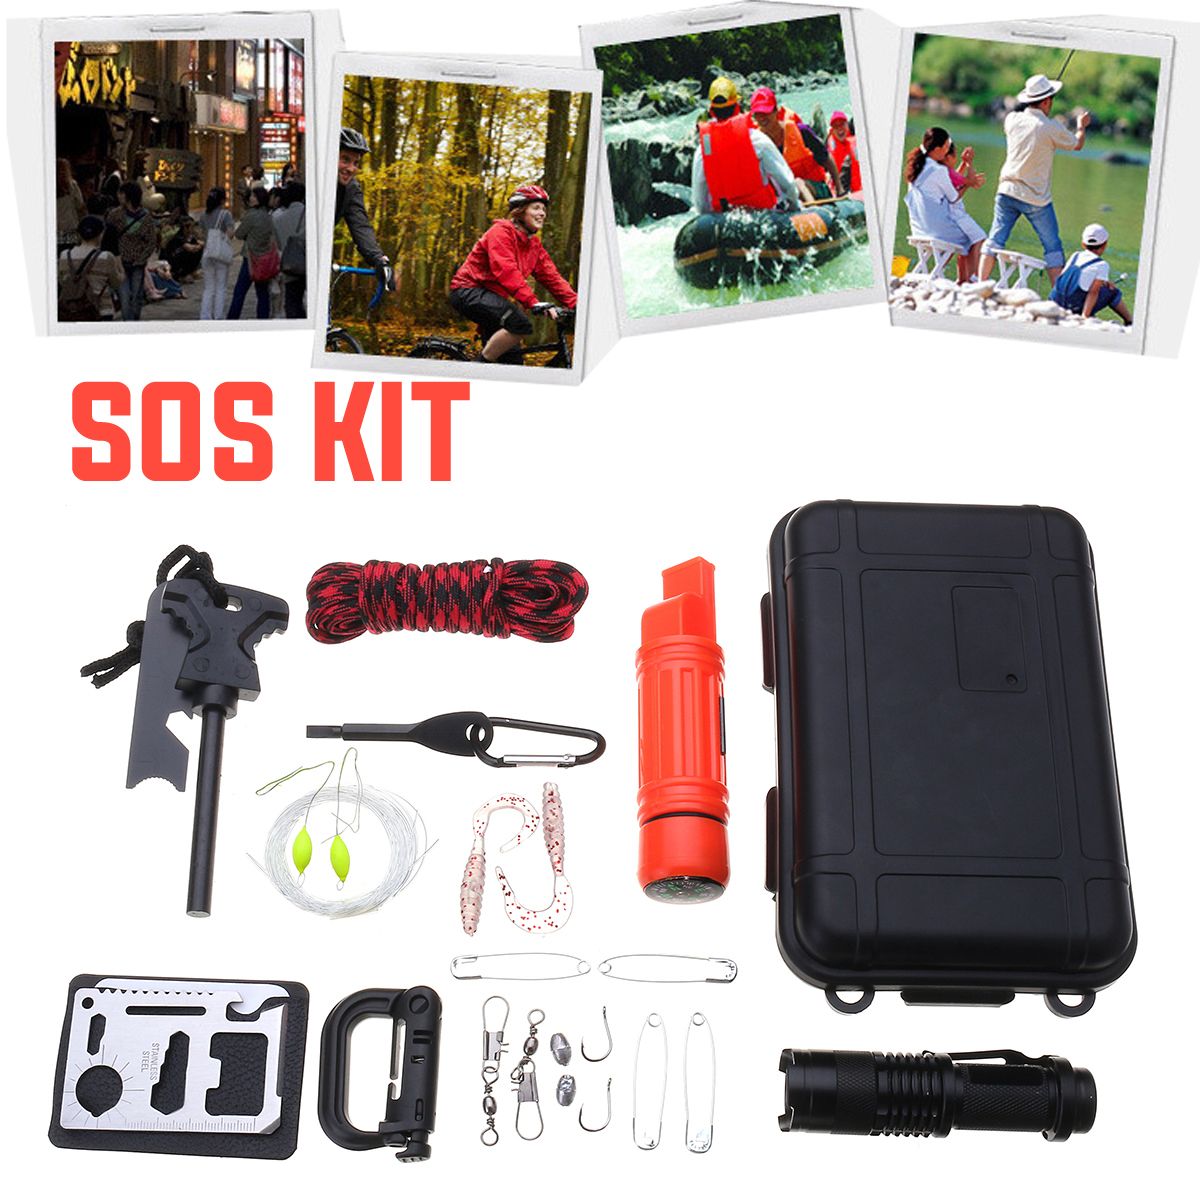 Emergency-Survival-Gear-Kit-SOS-Survival-Tools-Kit-With-Umbrella-Rope-Compass-Whistle-Carabiner-1309360